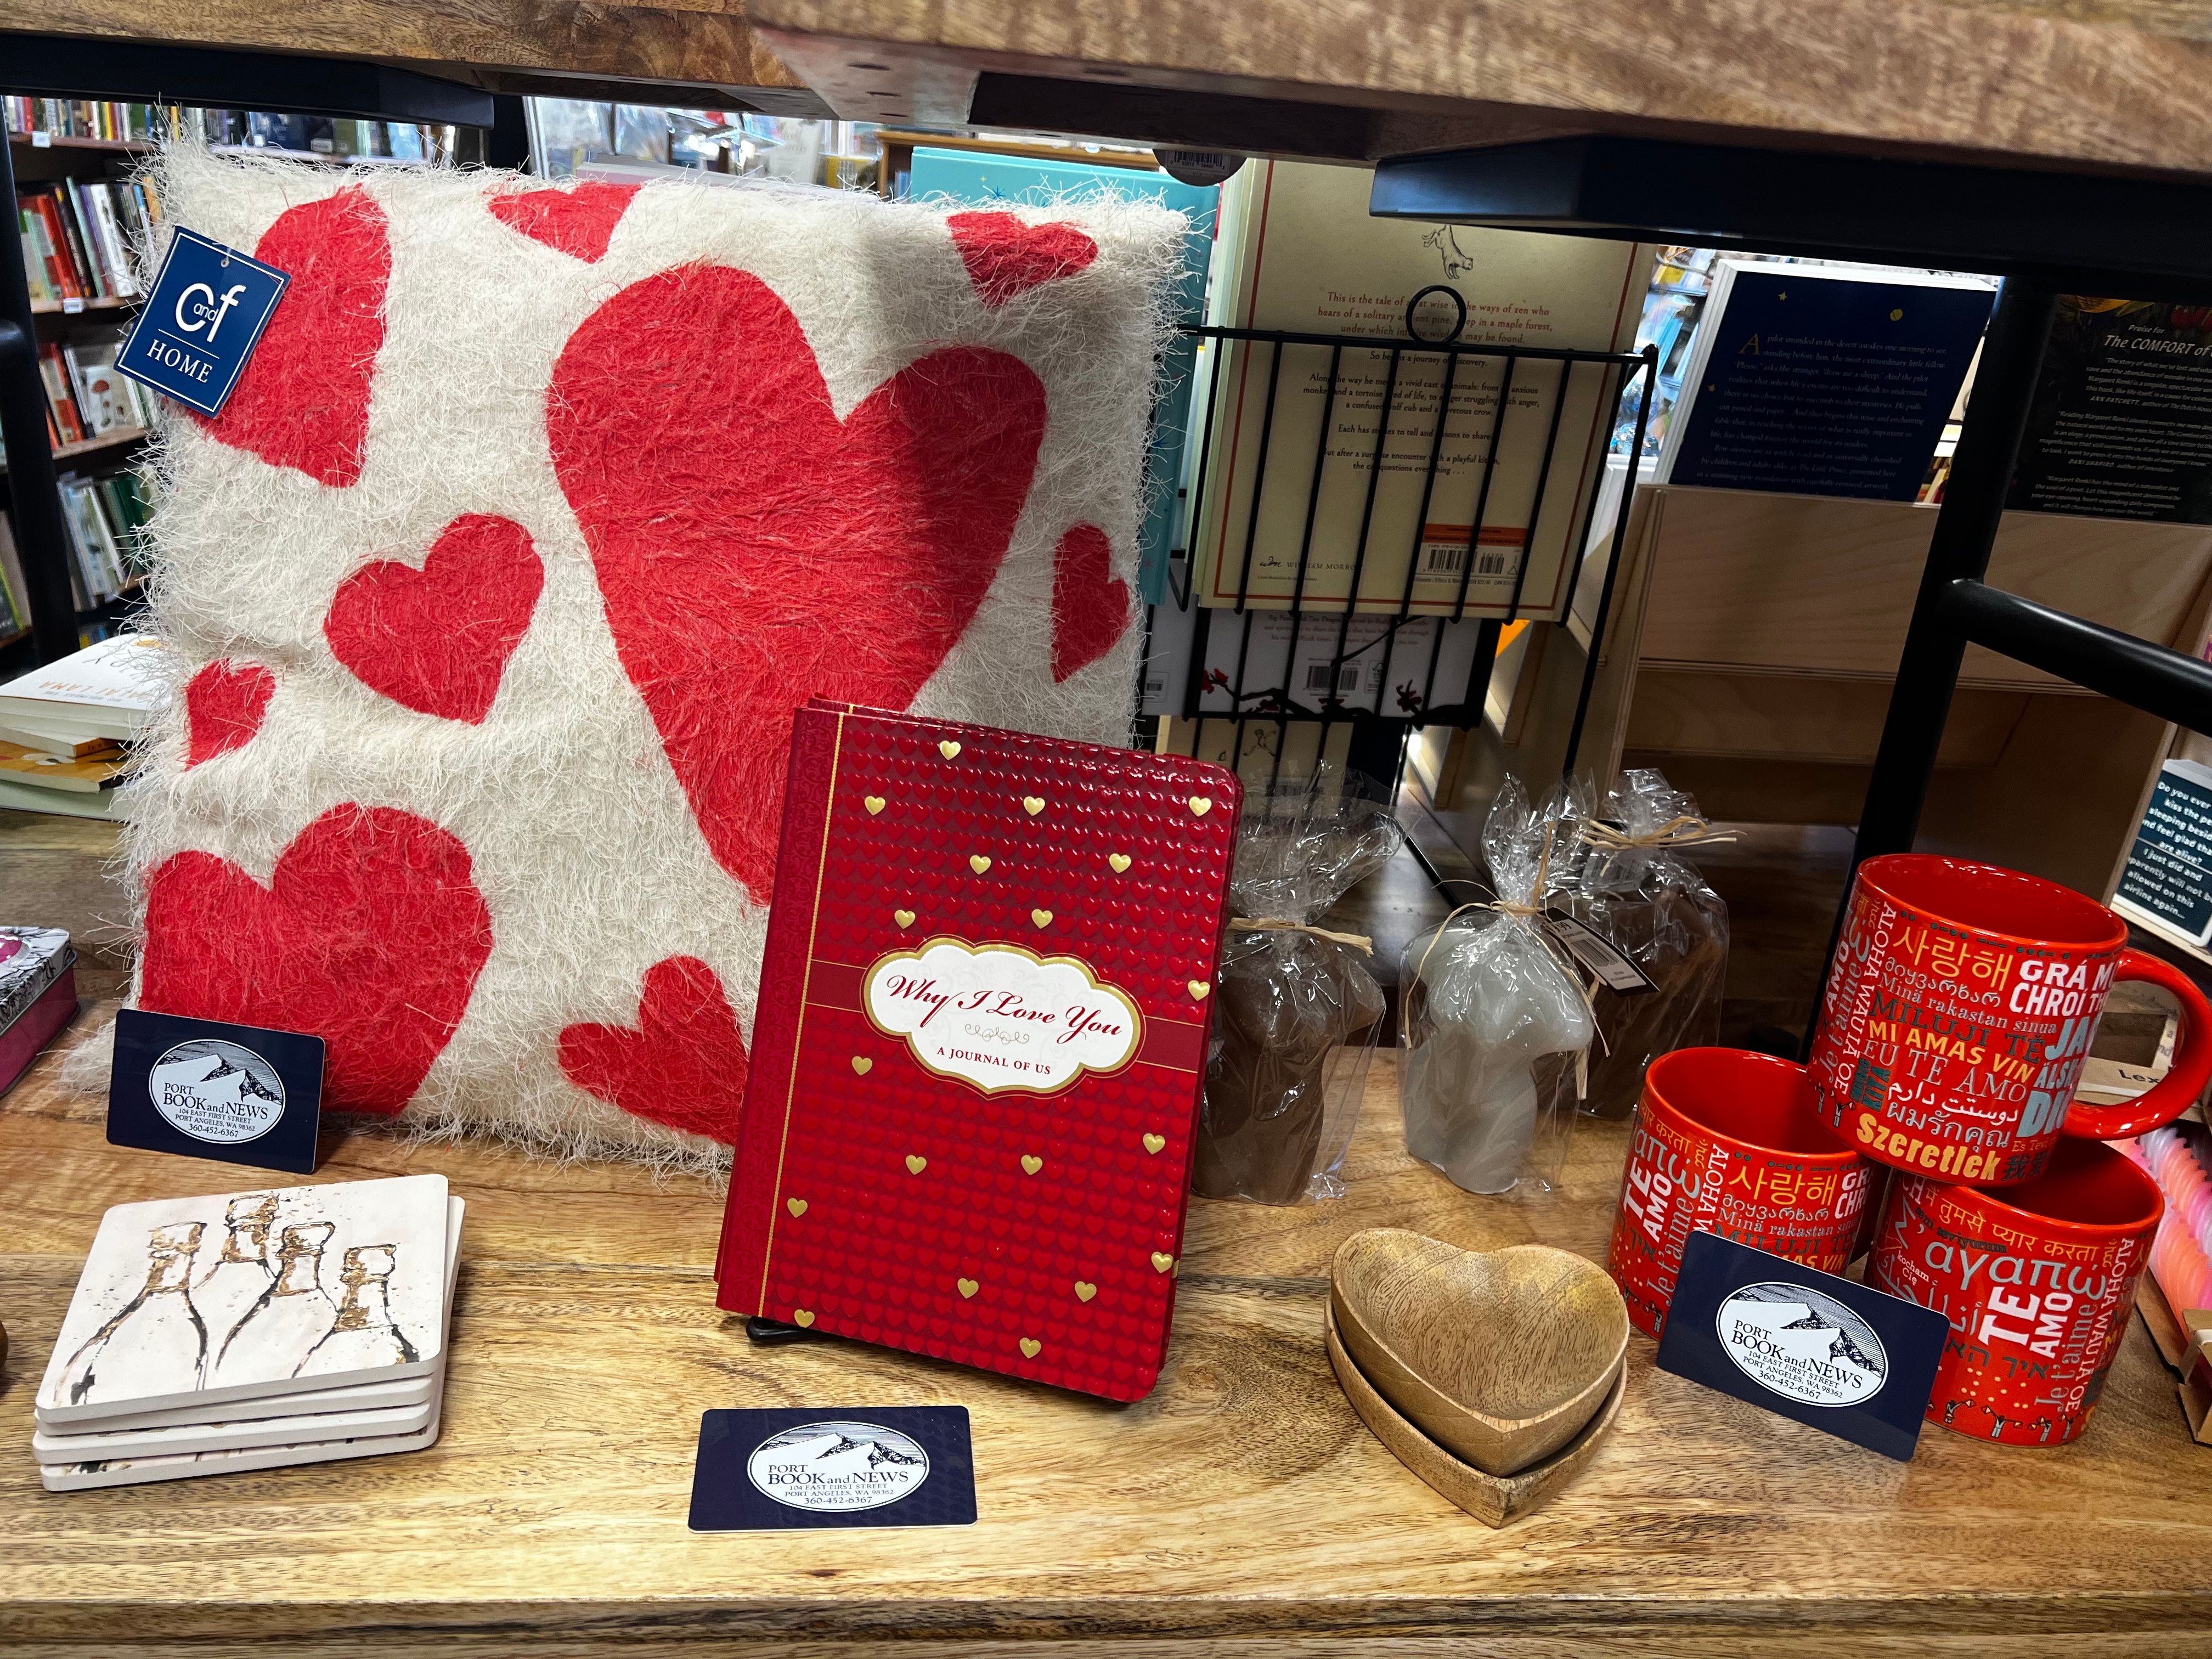 Valentines-themed items from Port Book and News displayed on a shelf.